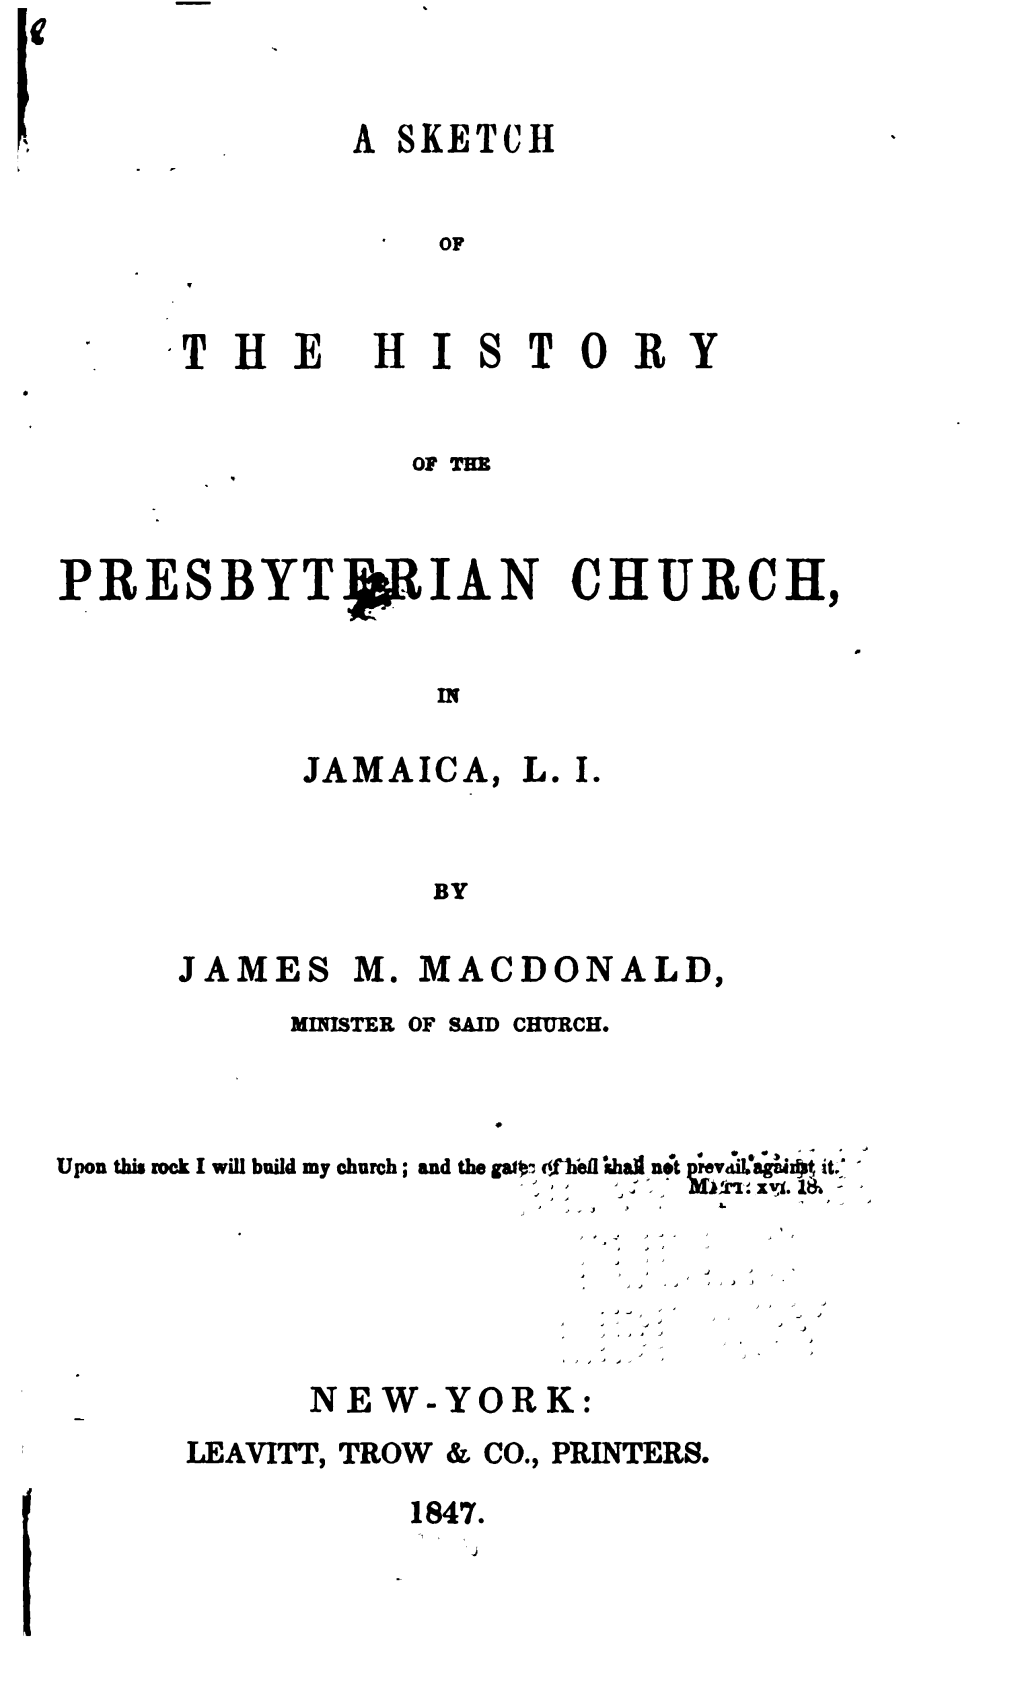 A Sketch of the History of the Presbyterian Church, in Jamaica, L.I